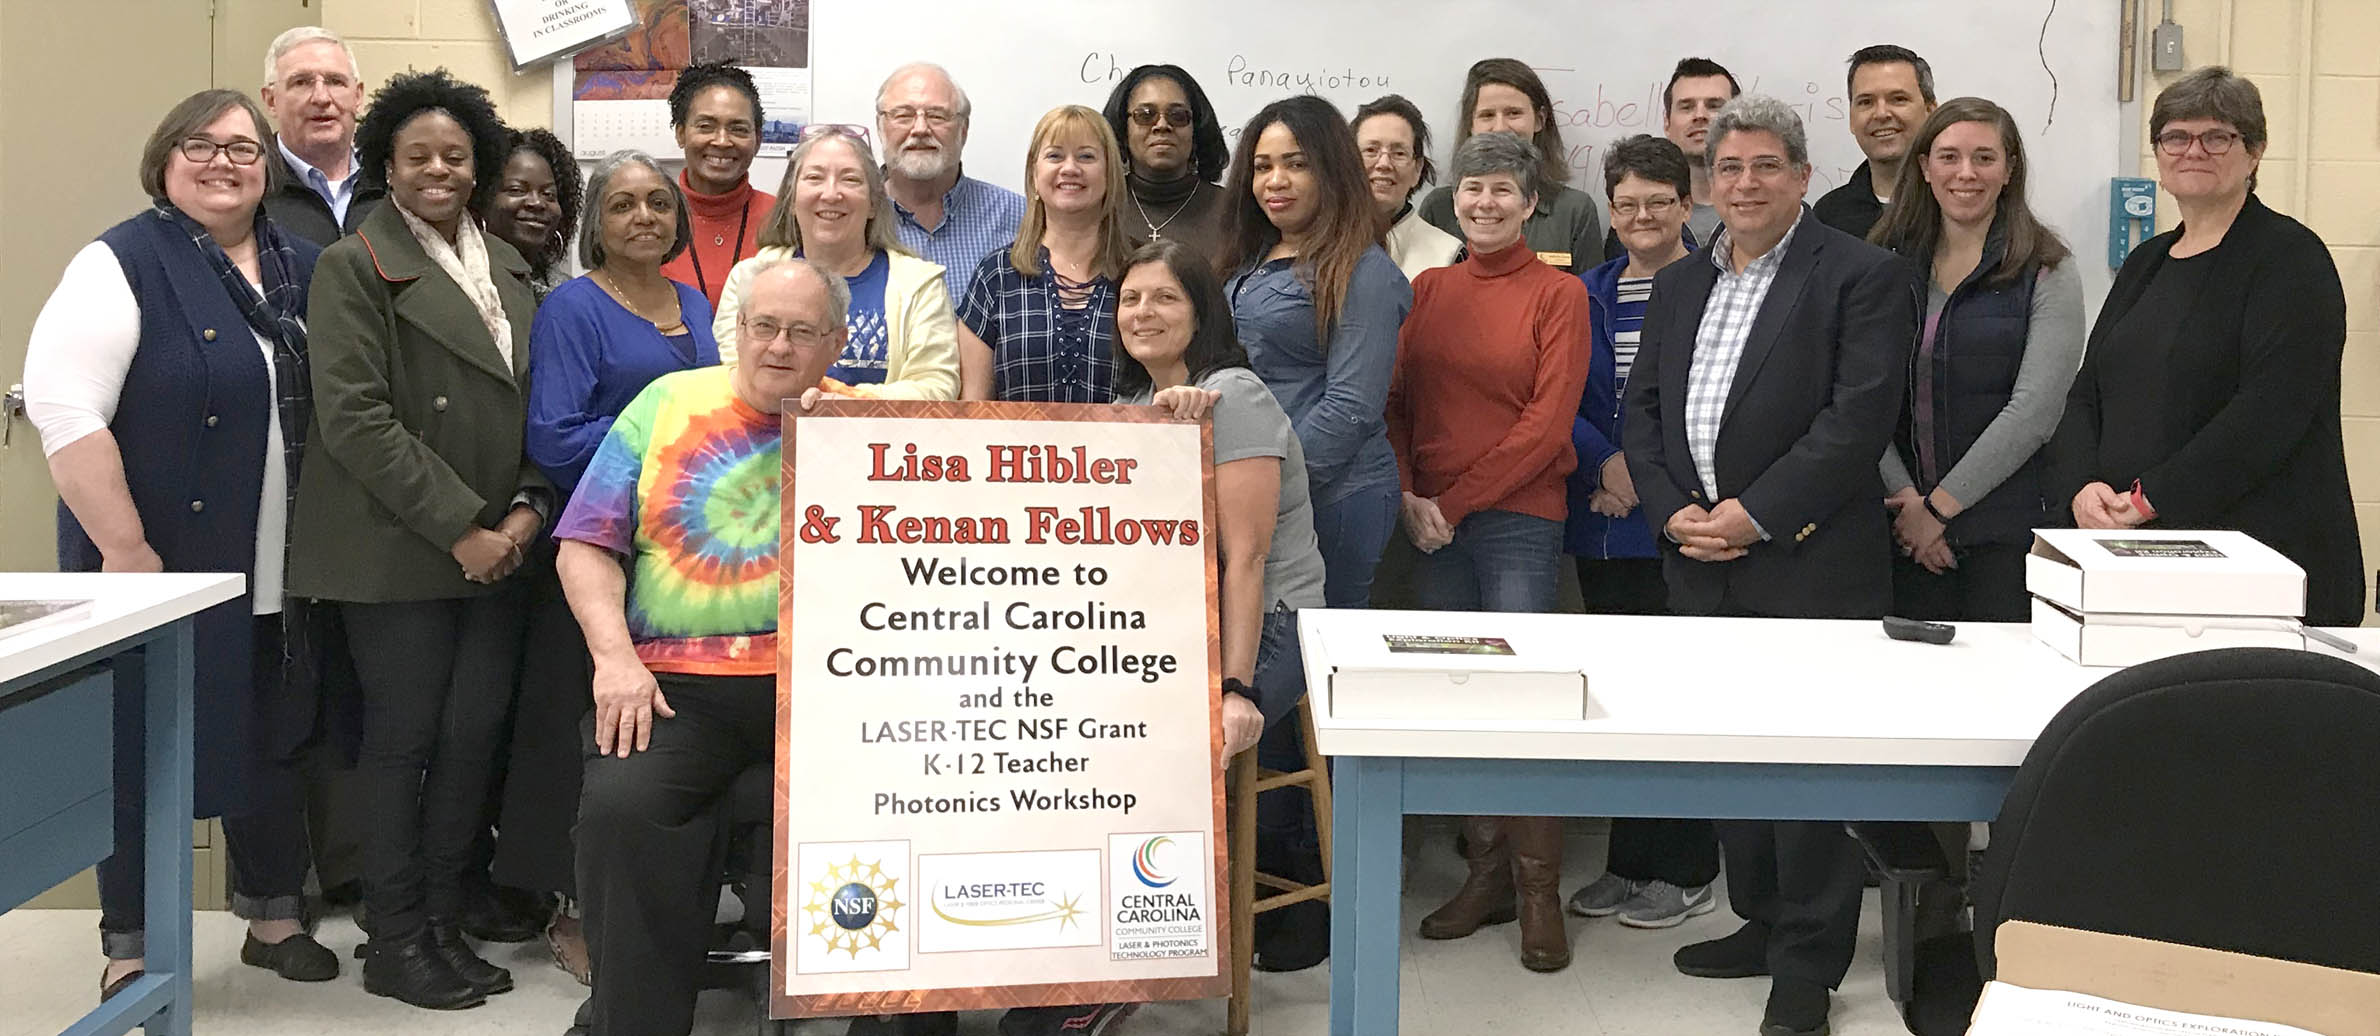 Click to enlarge,  The Central Carolina Community College (CCCC) Laser and Photonics Technology (LPT) program teamed with LASER-TEC and the Kenan Fellows program to conduct a K-12 STEM Teacher Photonics Workshop on Saturday March 24. 